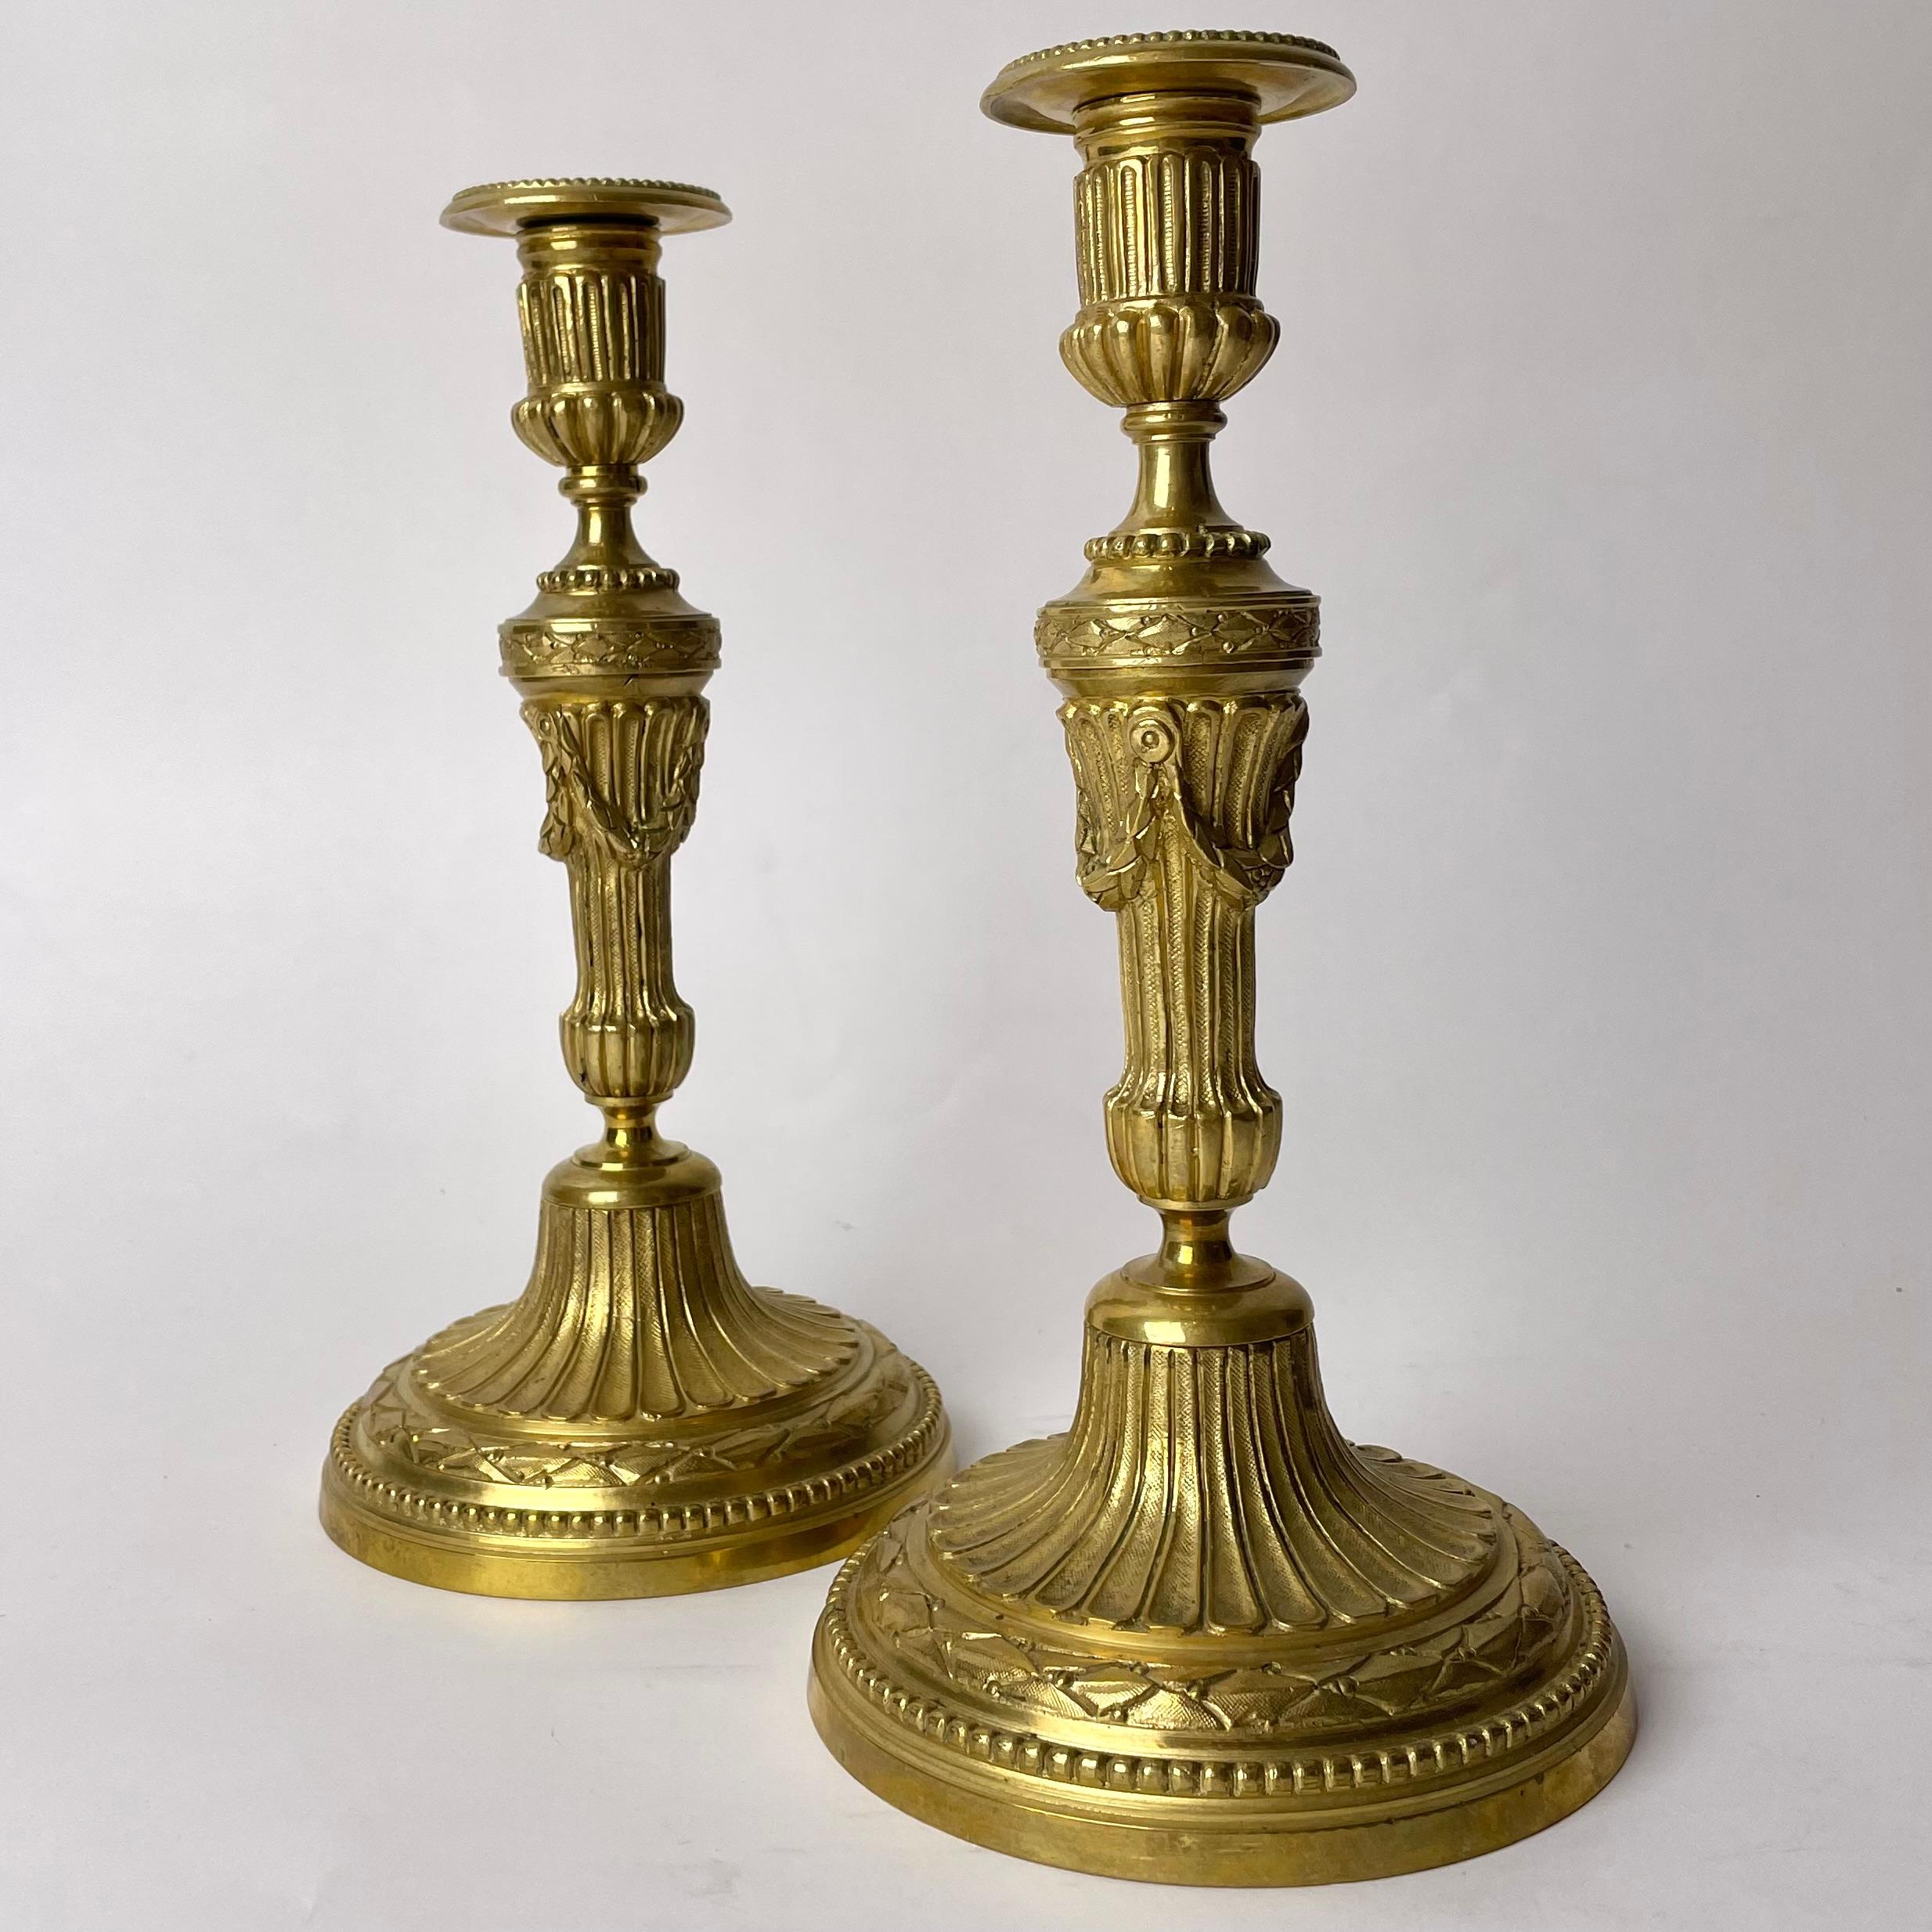 A Pair of Elegant and Ornate Gilt Bronze Candlesticks from the 19th Century. In the style of Louis XVI.

This pair of gilt bronze candlesticks are highly ornate in the style of Louis XVI, reflecting an appreciation for the elegant forms of classical